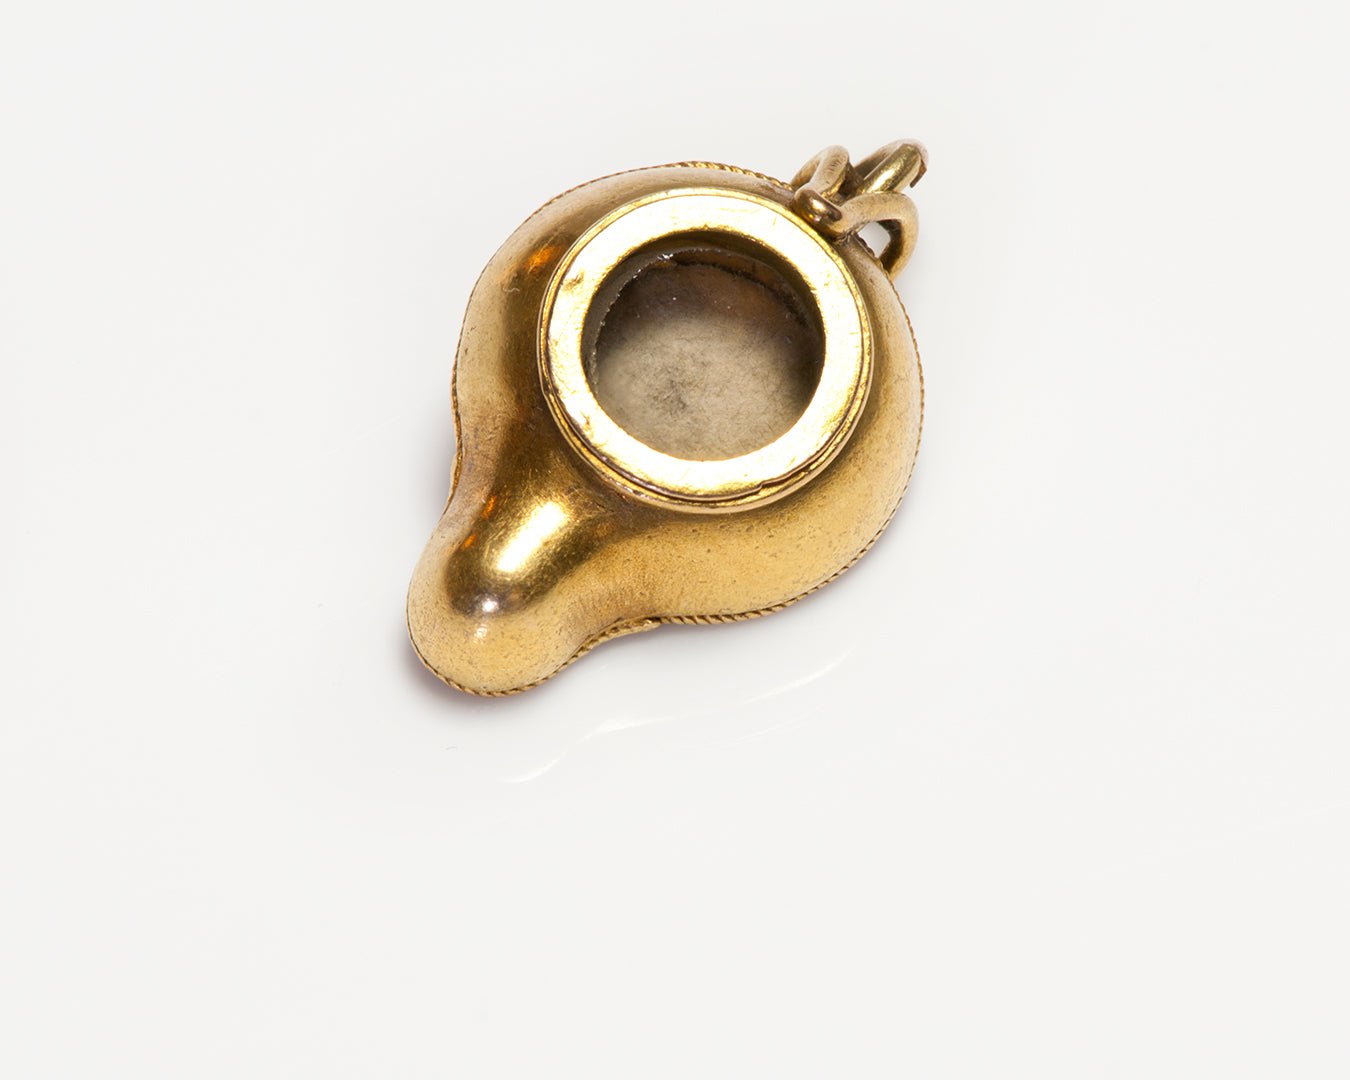 Antique Gold Enamel Charm Attributed to Castellani